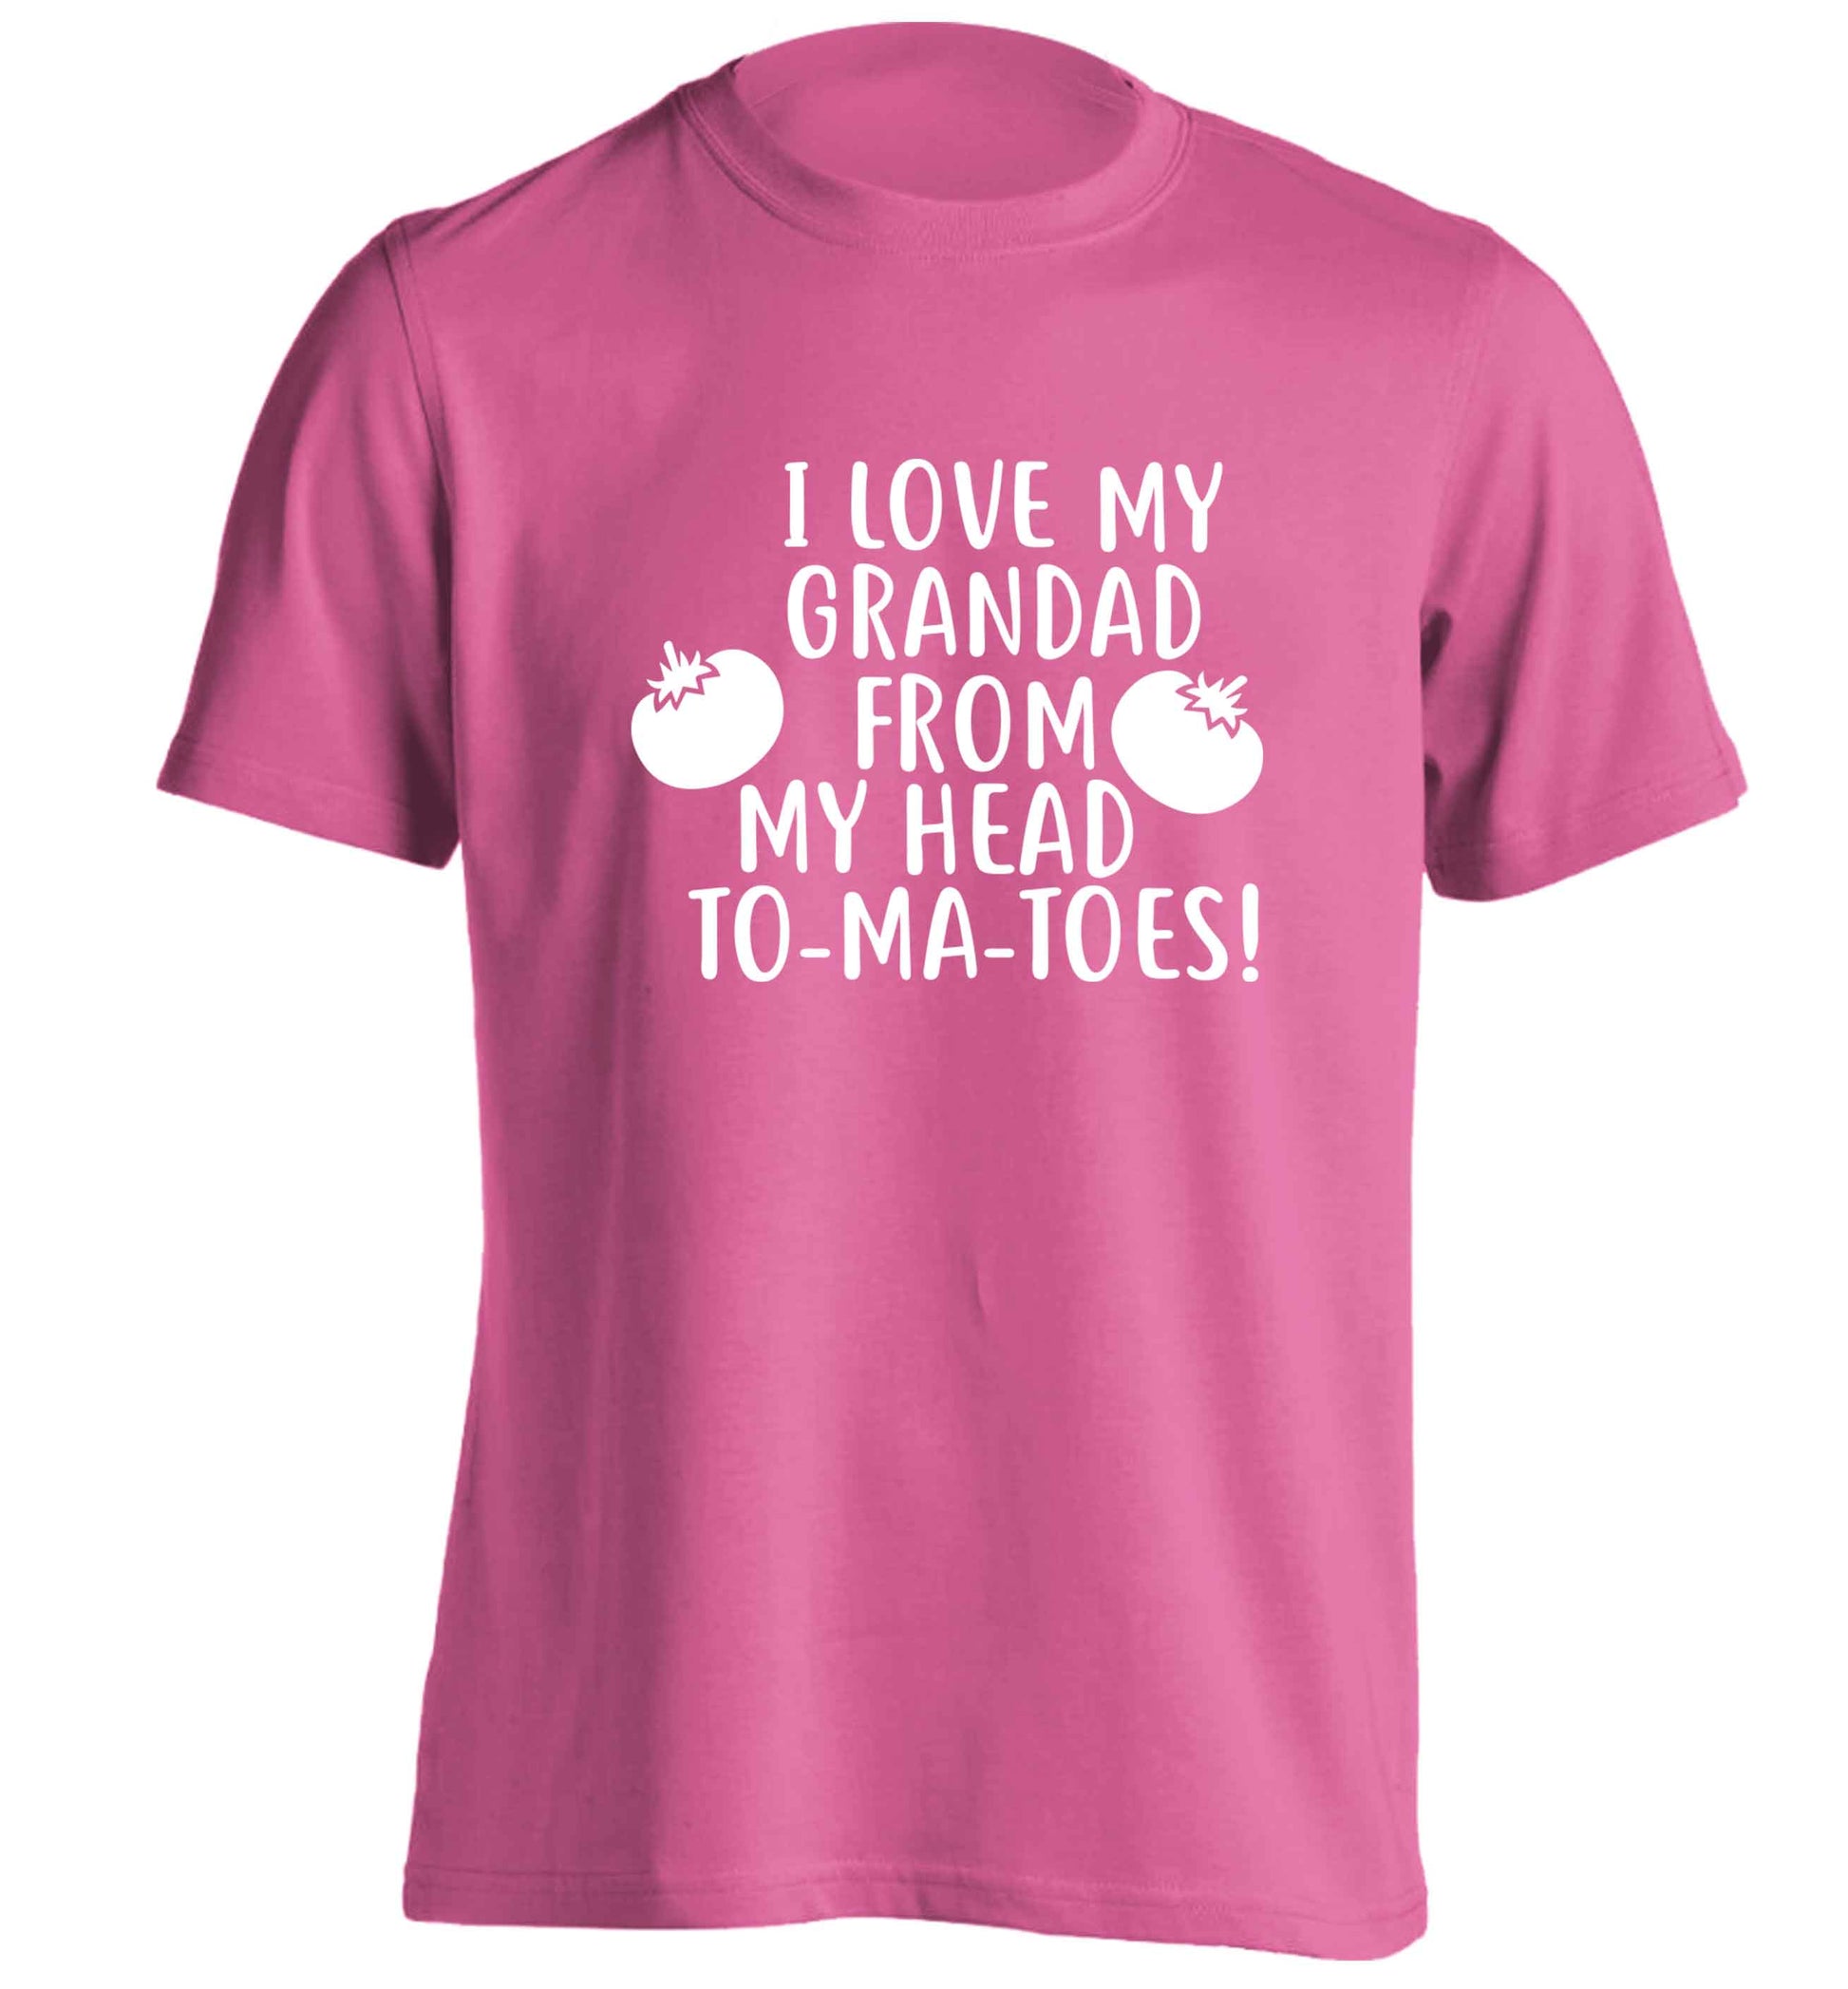 I love my grandad from my head To-Ma-Toes adults unisex pink Tshirt 2XL